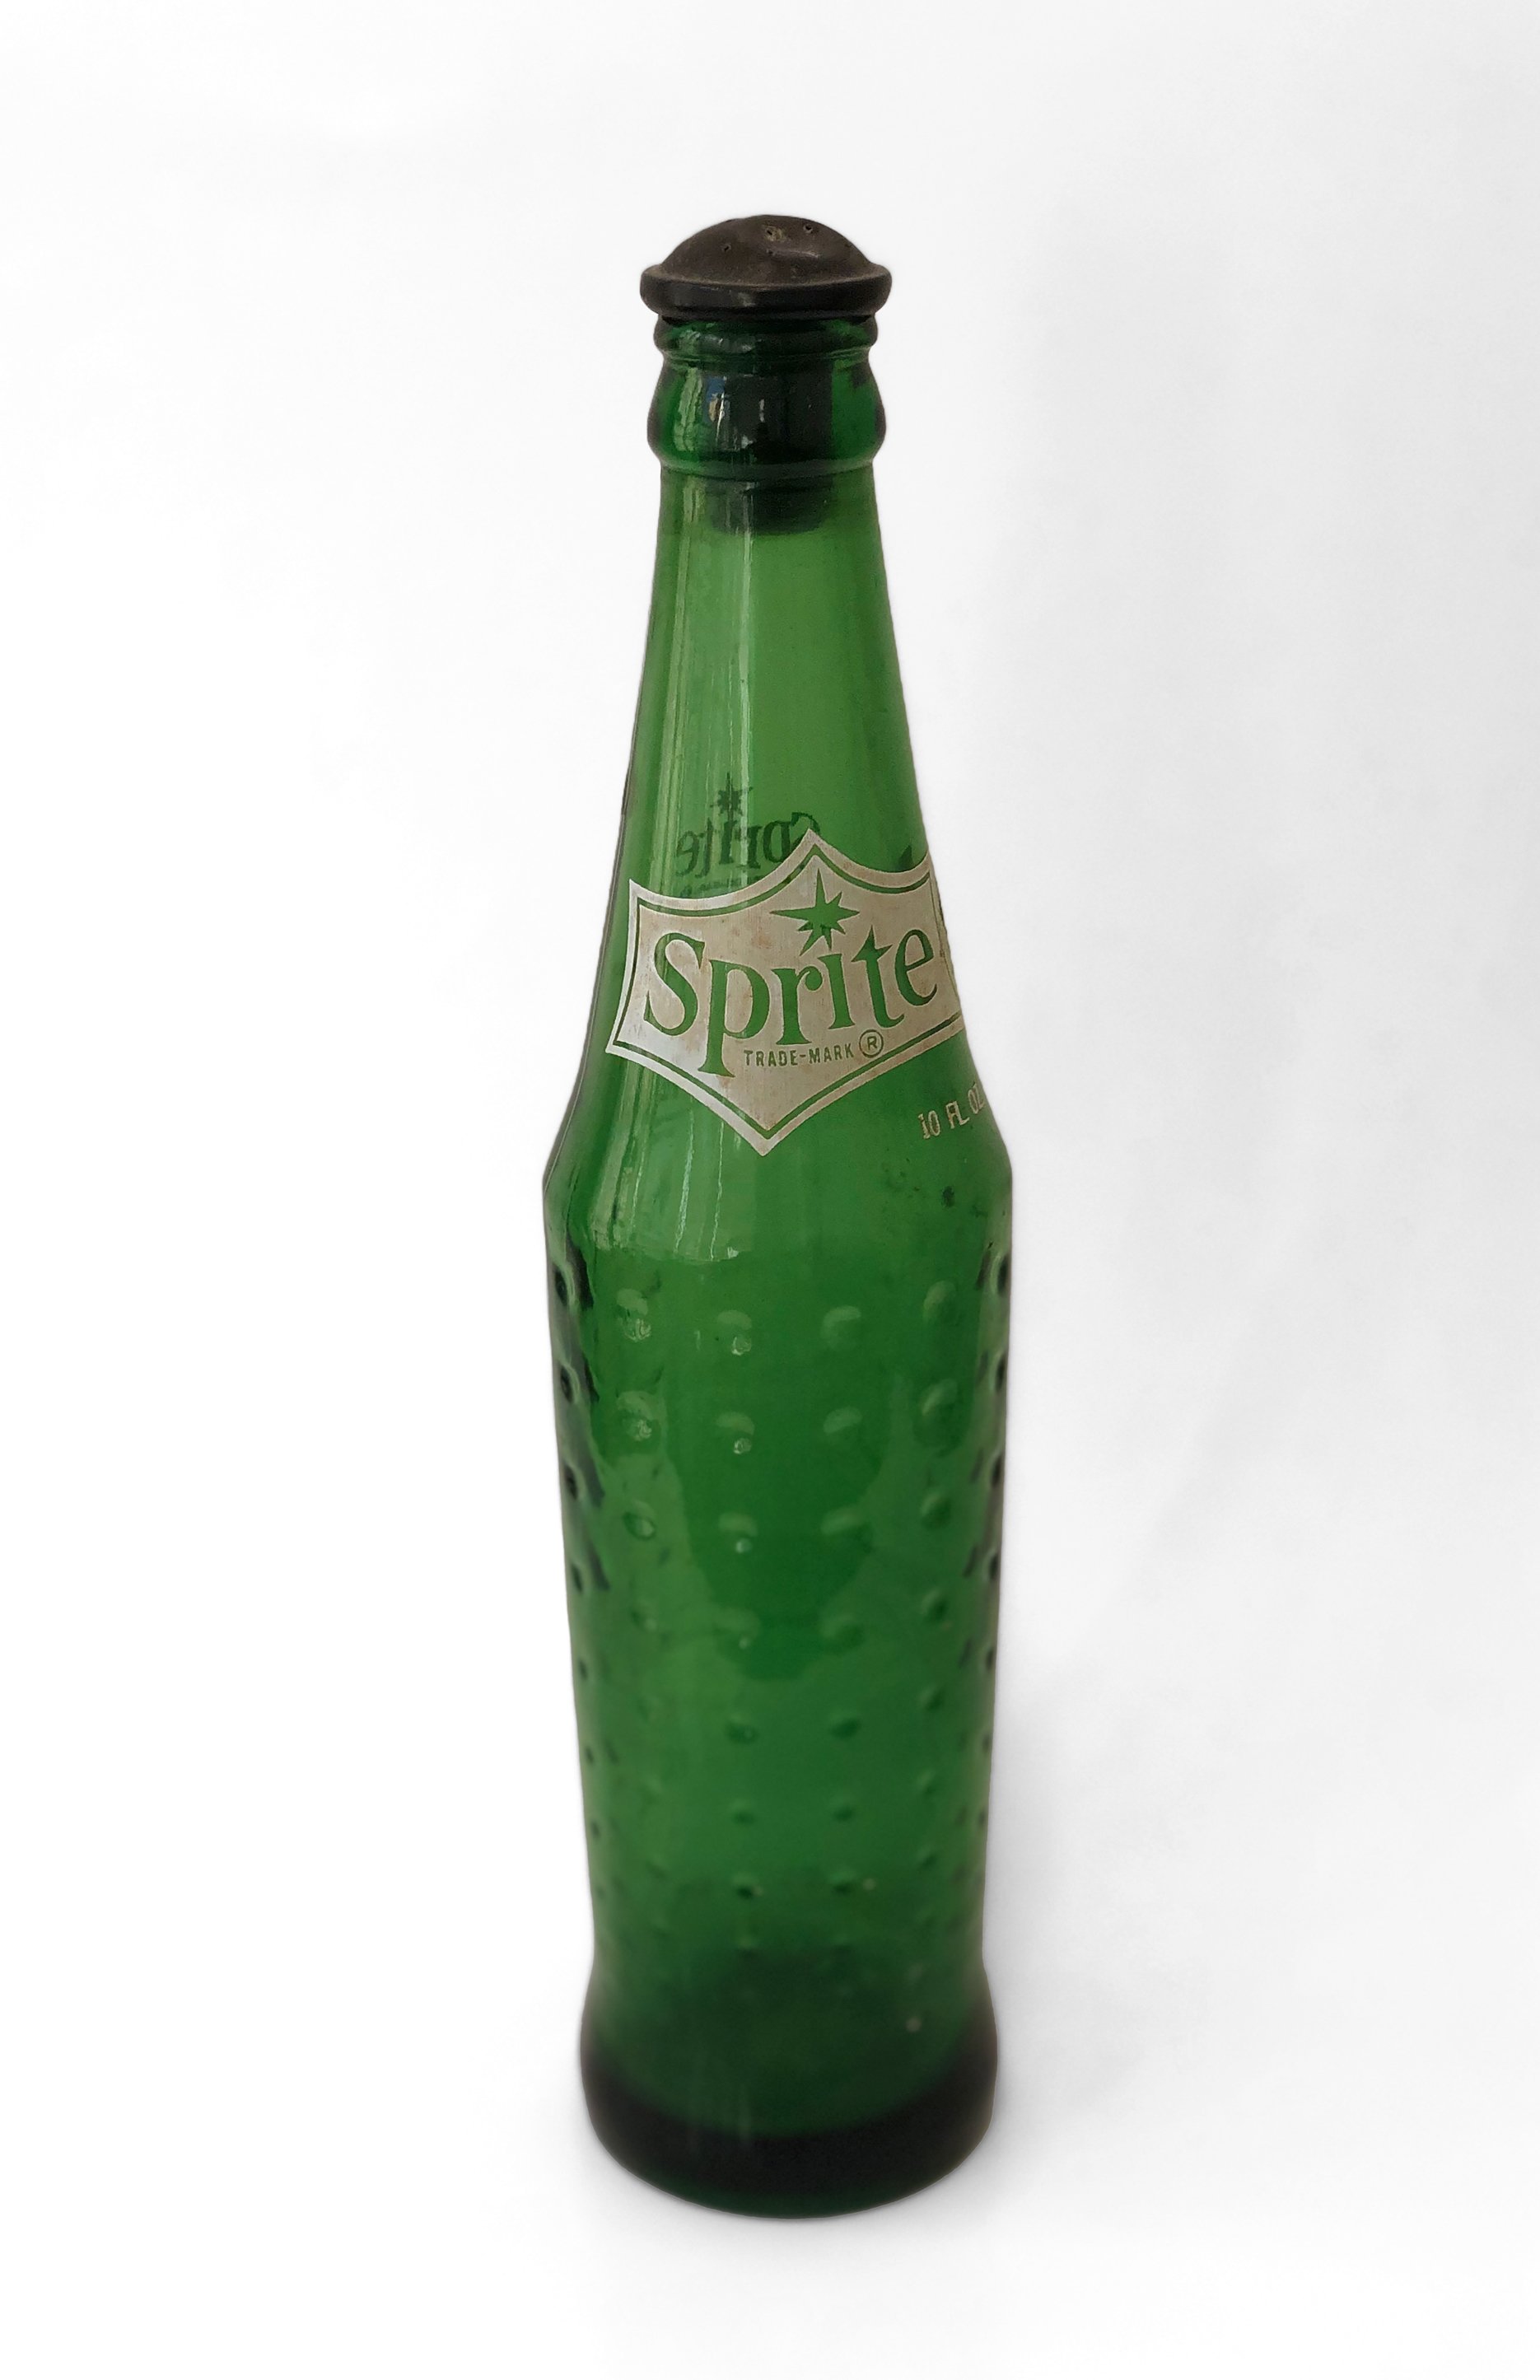    The Sprite Bottle, an icon from bygone days before the steam iron, before 'wash and wear' clothes. It brings back memories of the ironing board and soap operas on the TV.   ~ Carol Ivey&nbsp;  